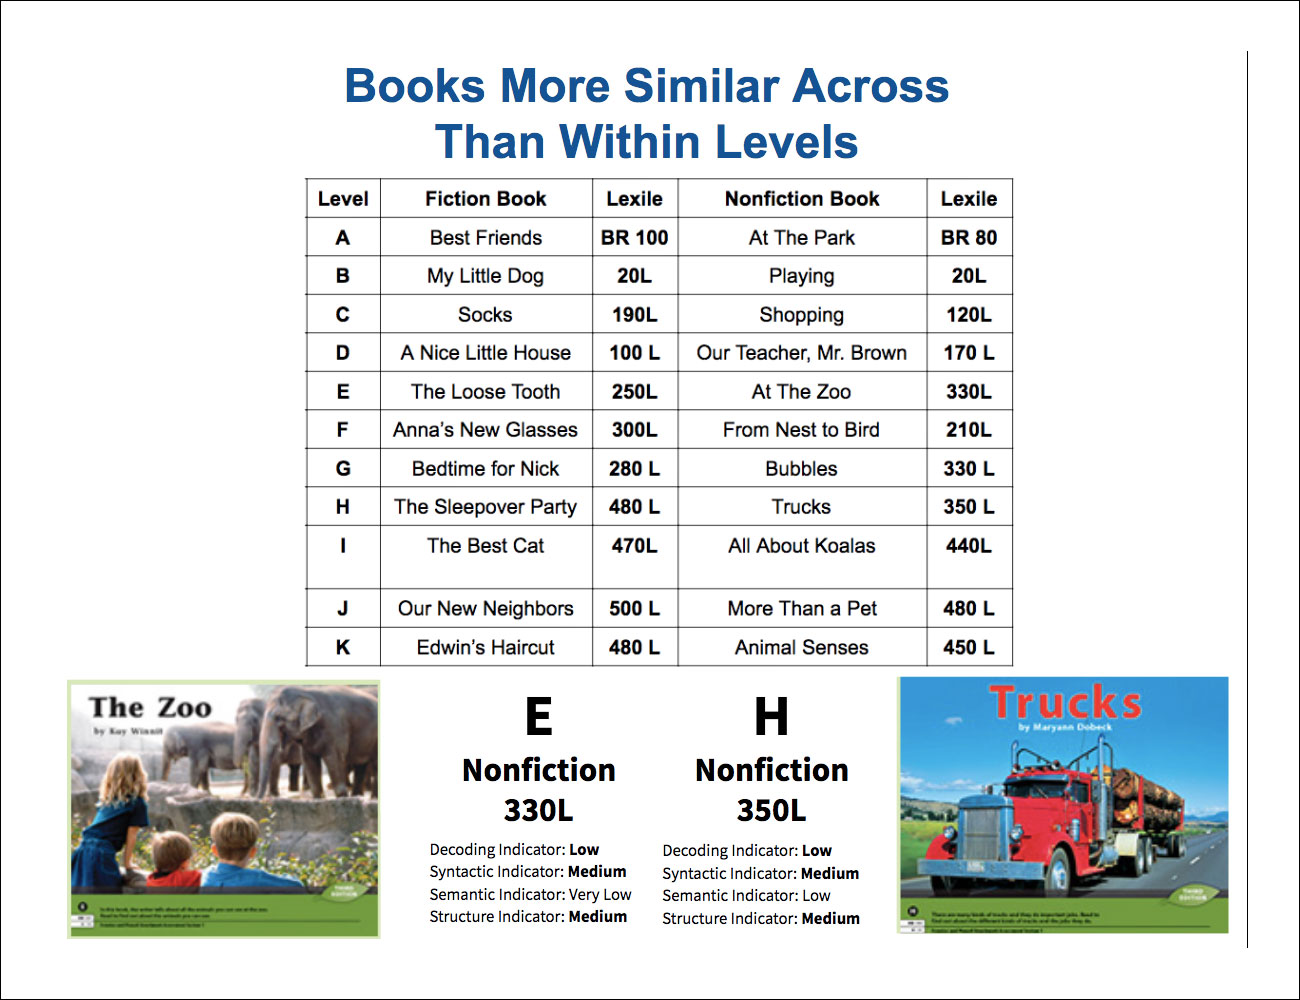 Books more similar across reading levels than within